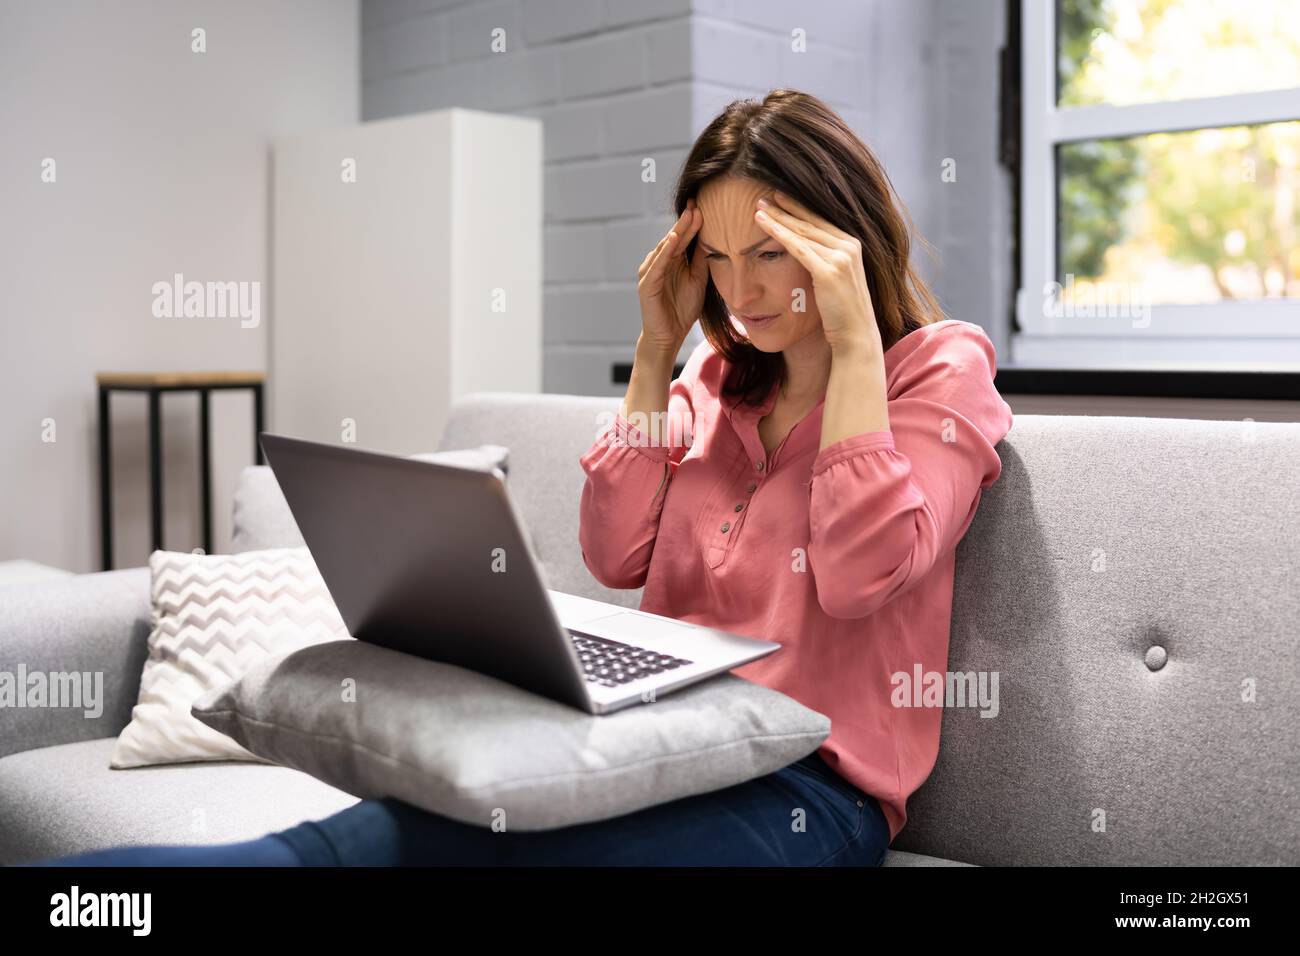 Depressed Business Woman In Home Office With Headache Stock Photo